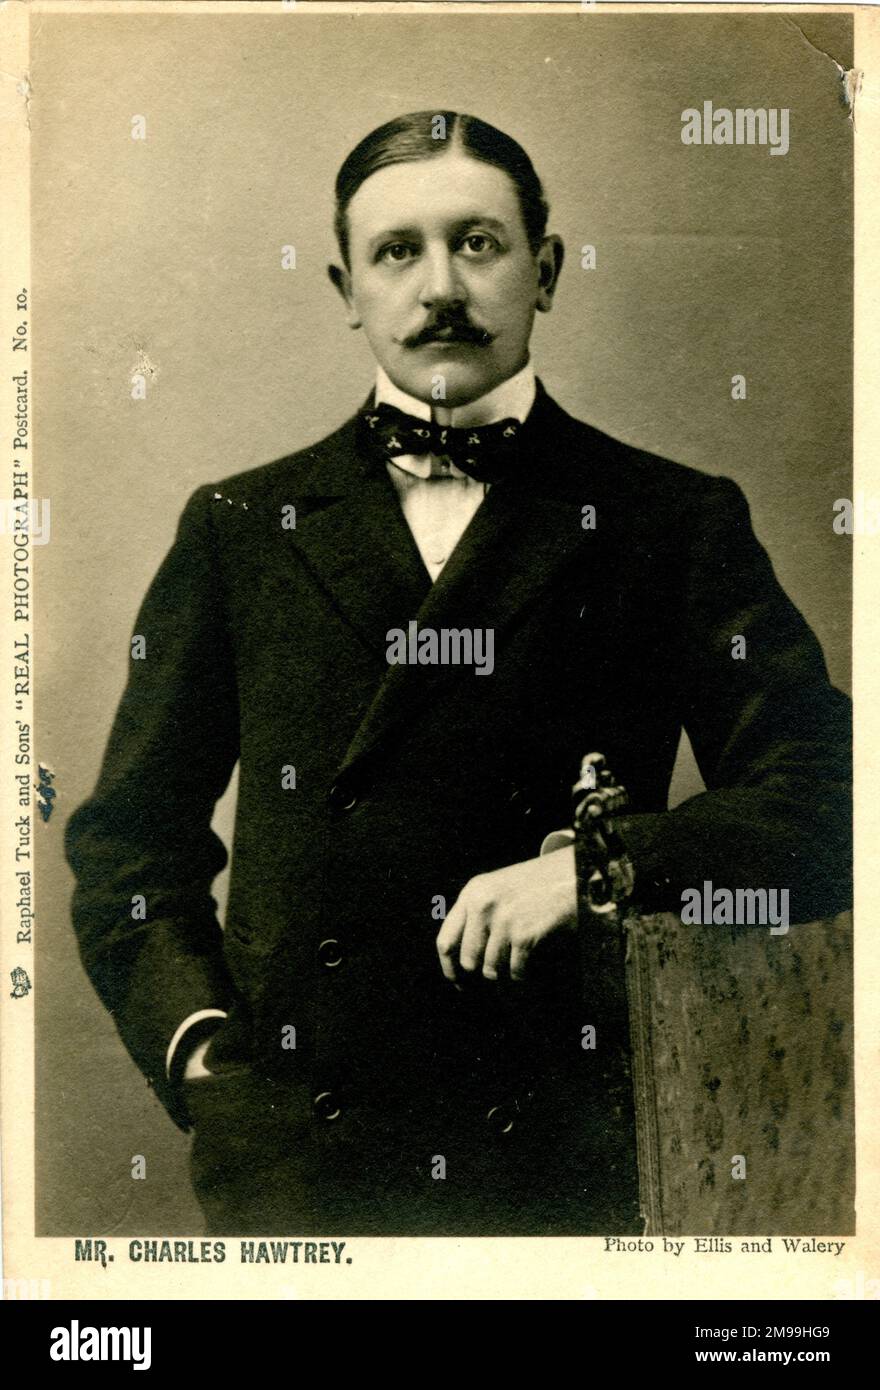 Charles Hawtrey (1858-1923), English actor, director, producer and theatre manager. Stock Photo